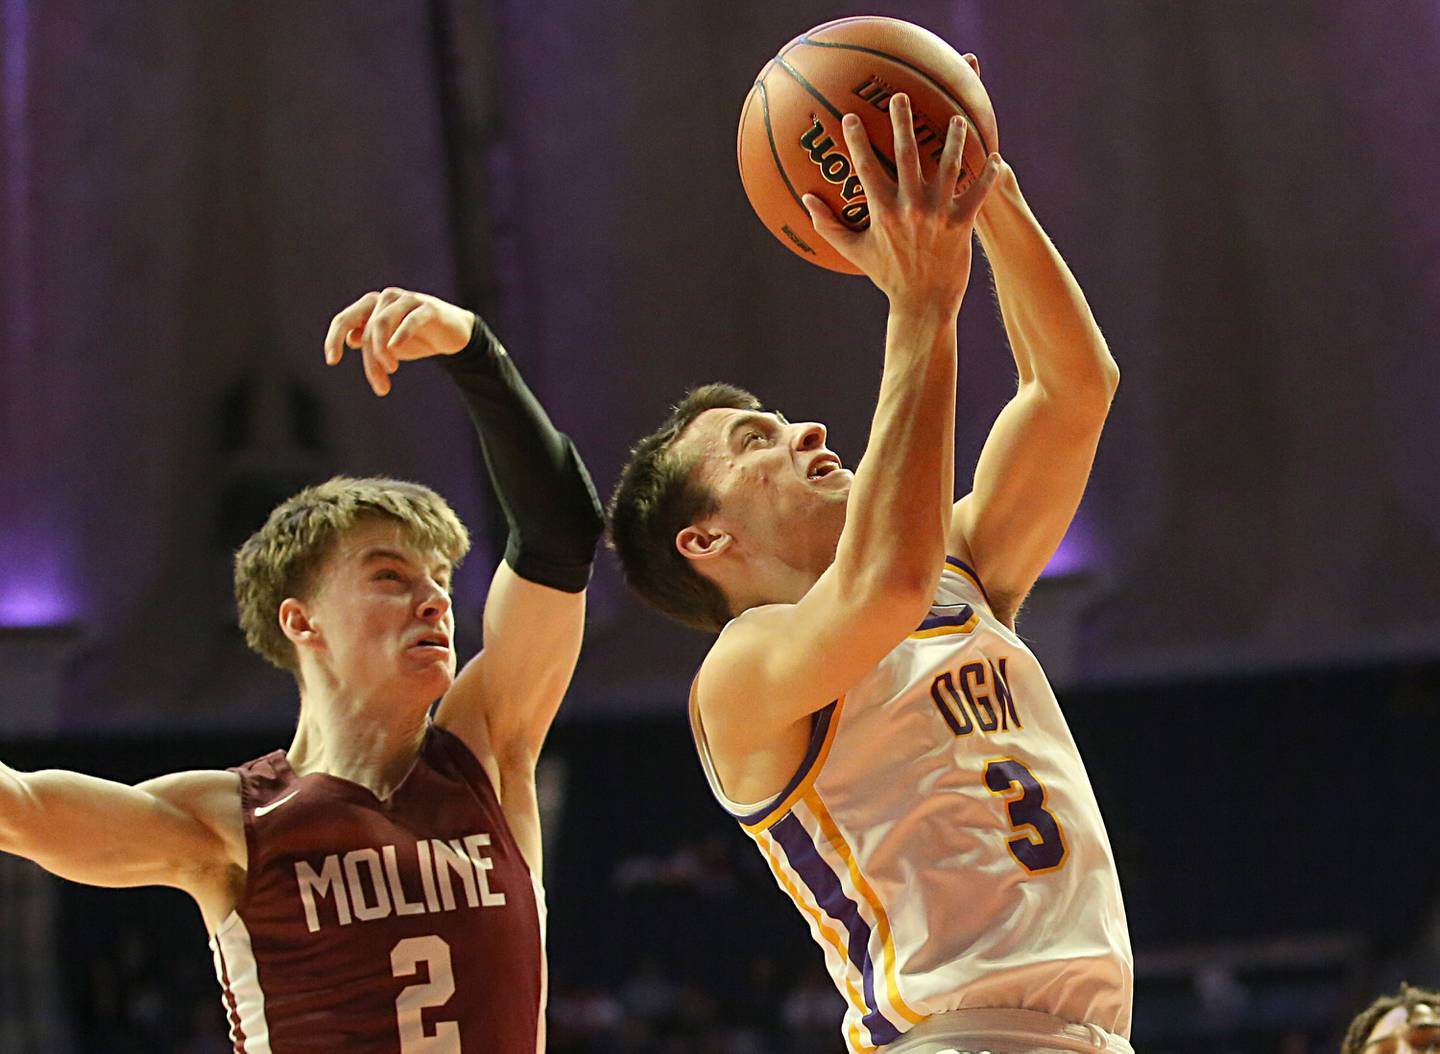 Downers Grove North's Ethan Thuin runs in the lane in front of Moline's Brock Harding during the Class 4A state semifinal game on Friday, March 10, 2023 in Champaign.